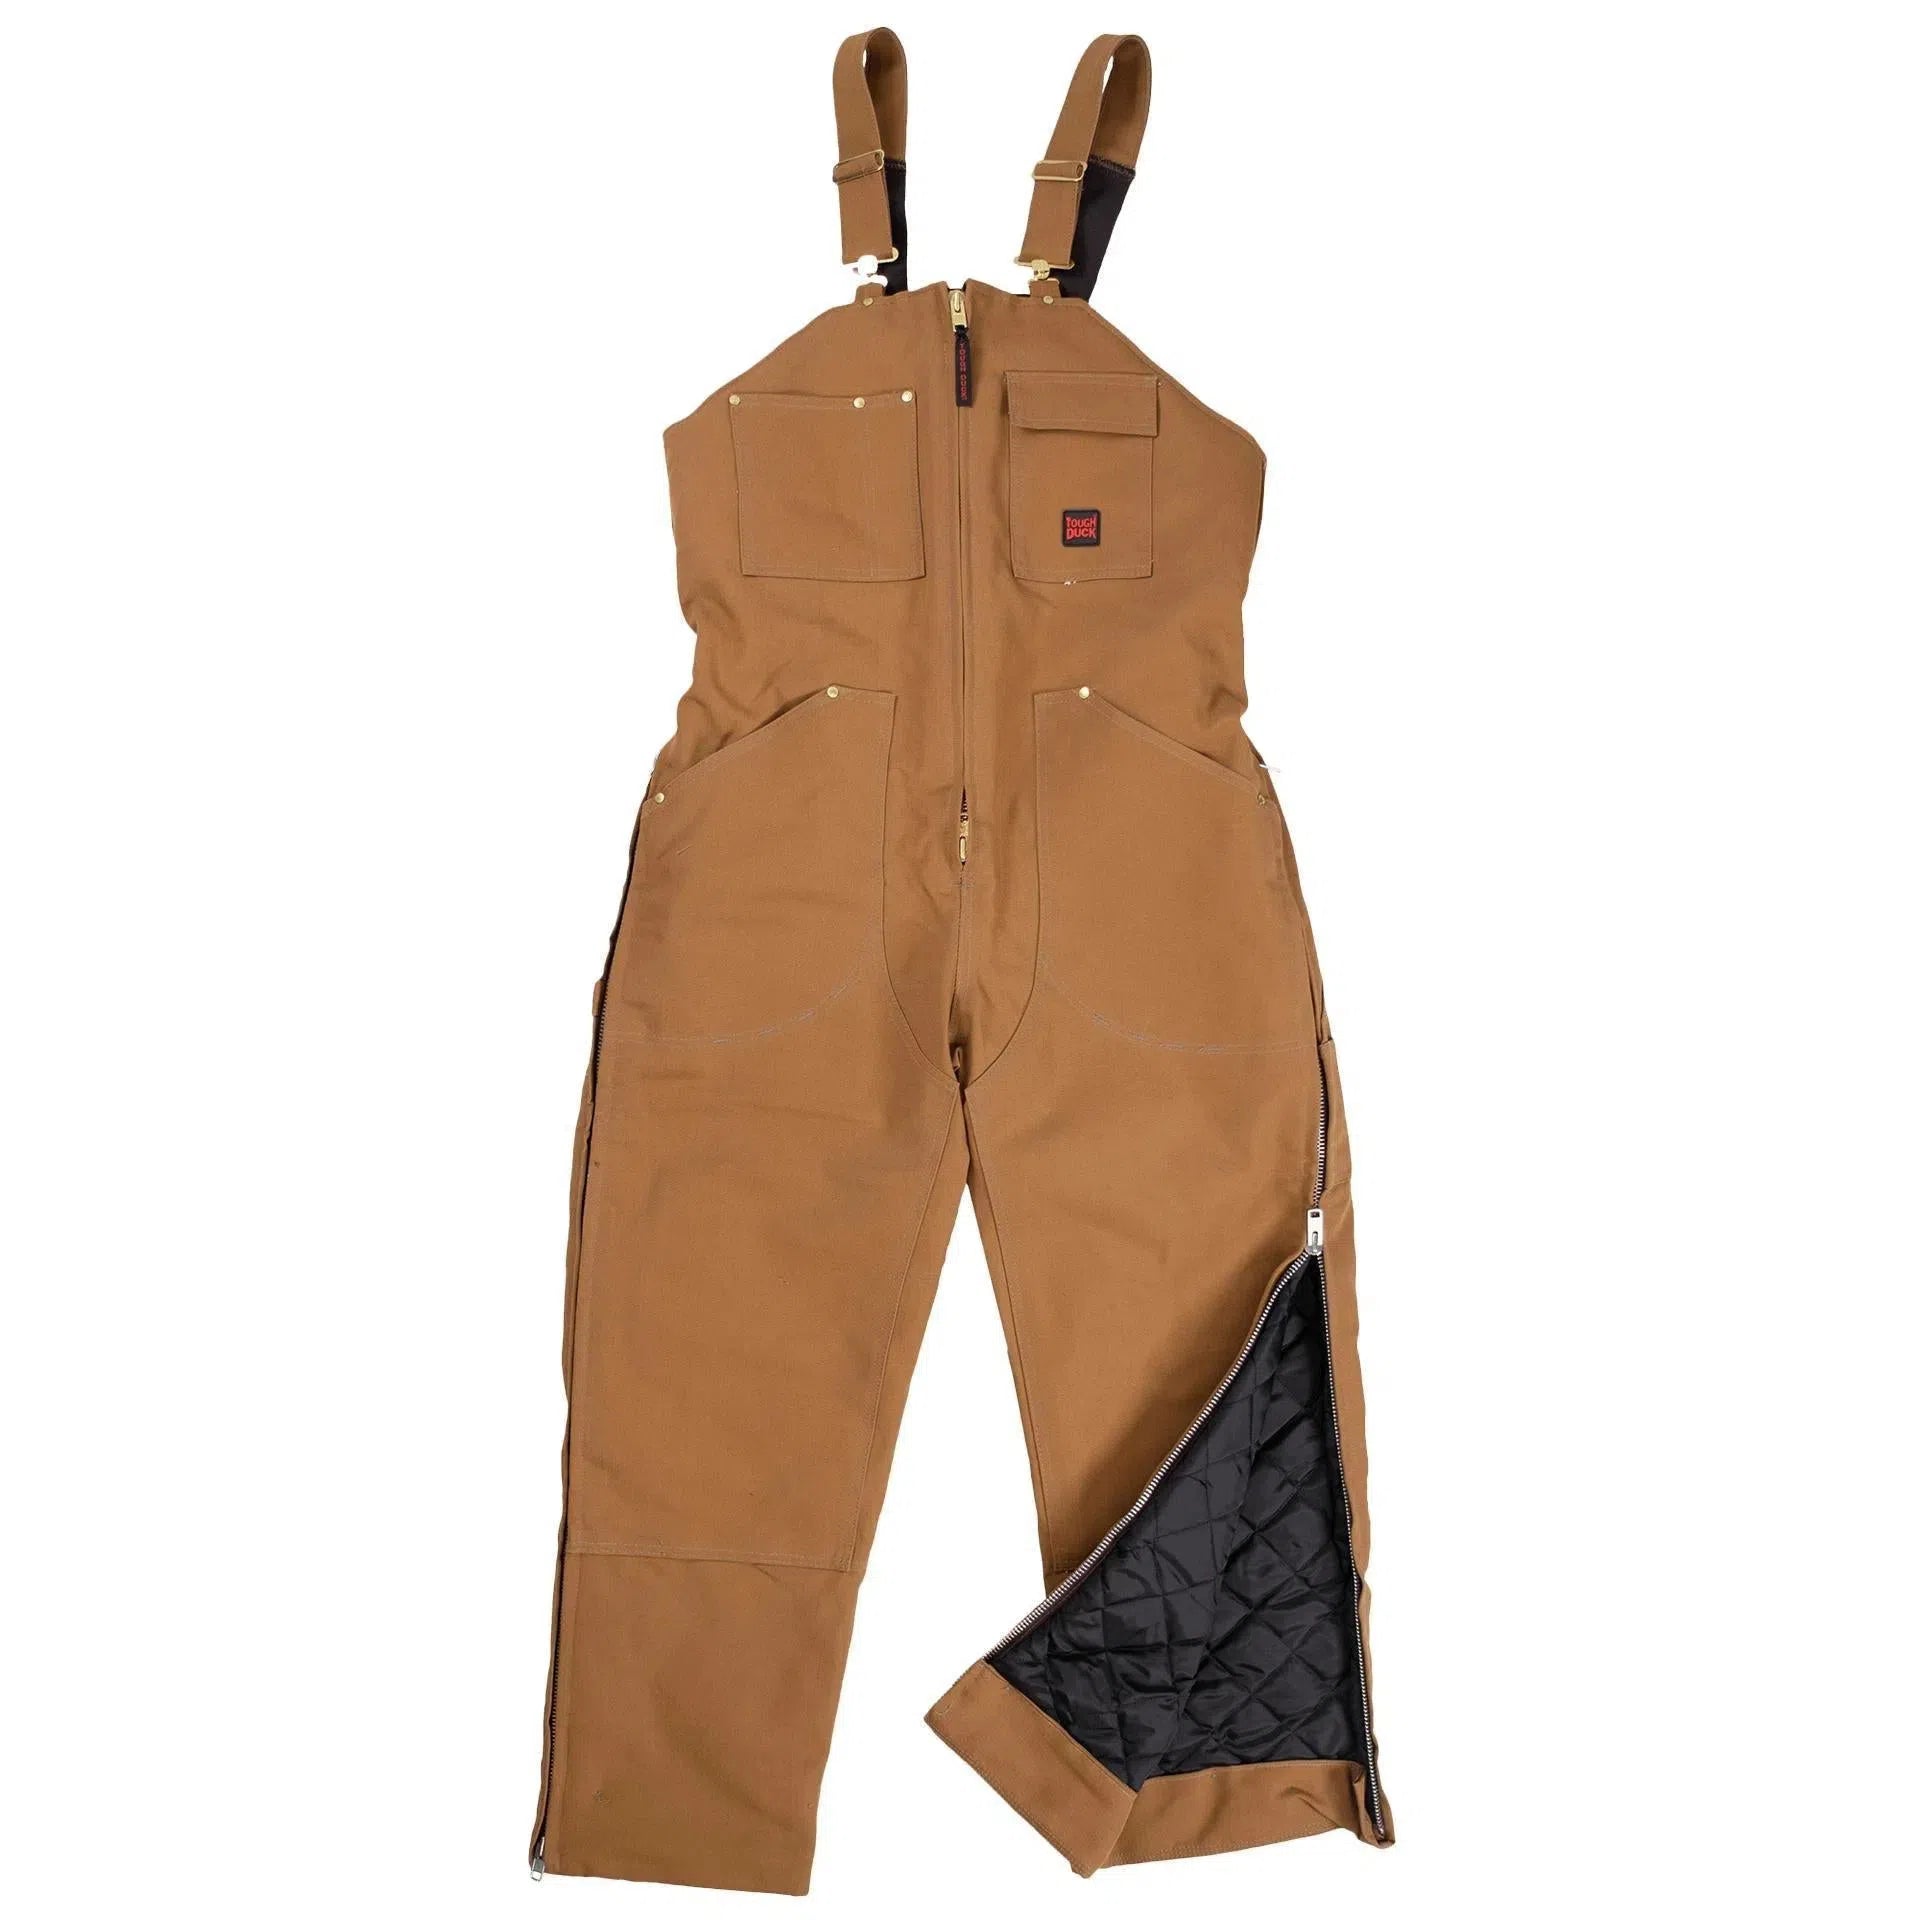 Deluxe Tough Duck lined overalls